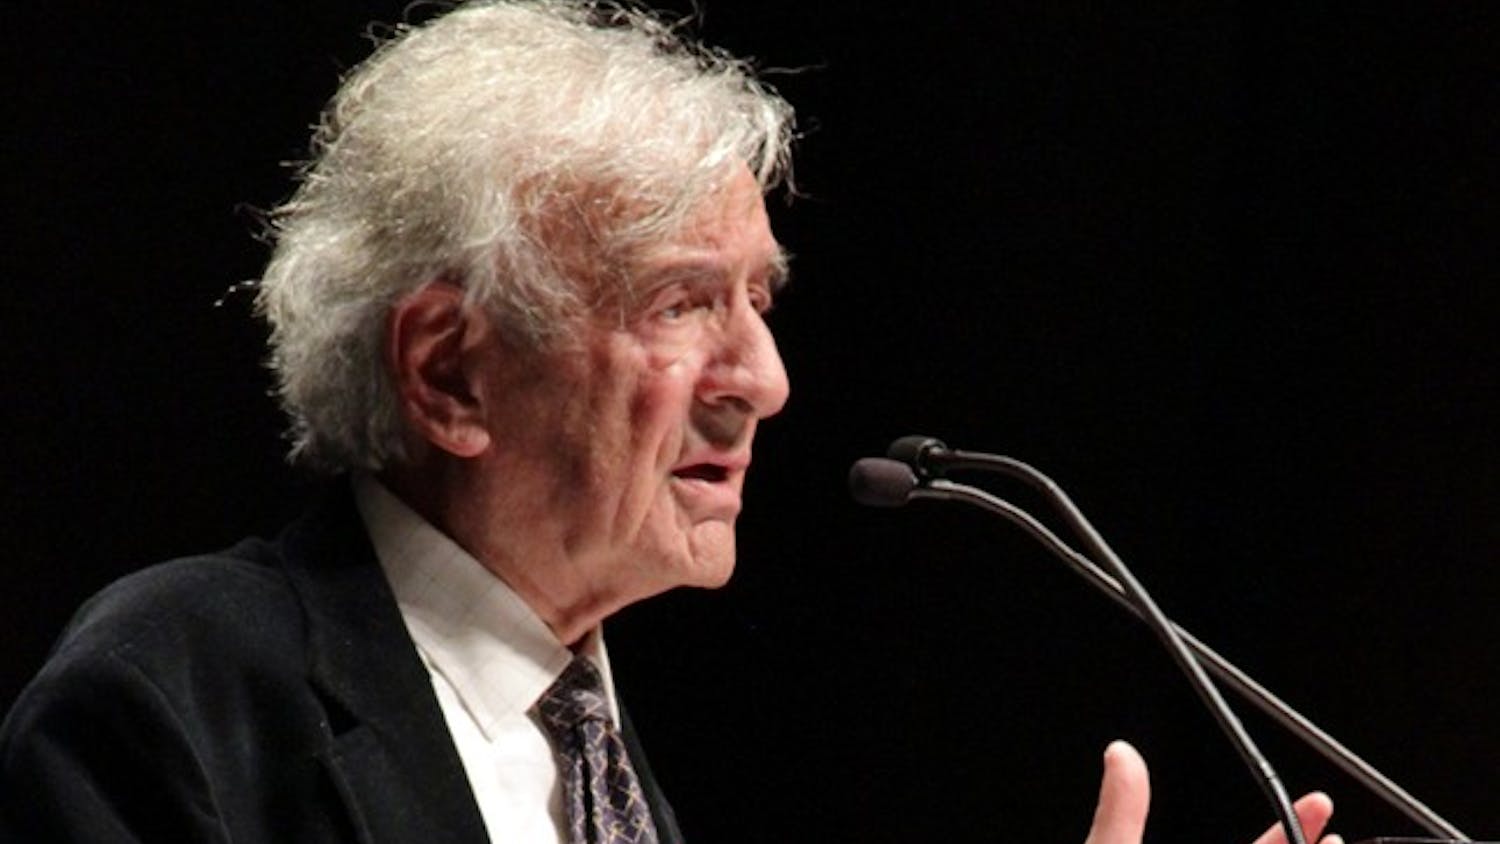 Elie Wiesel gives a speech titled “Against Indifference” in Memorial Hall on Sunday afternoon. Wiesel received the 1986 Nobel Peace Prize.